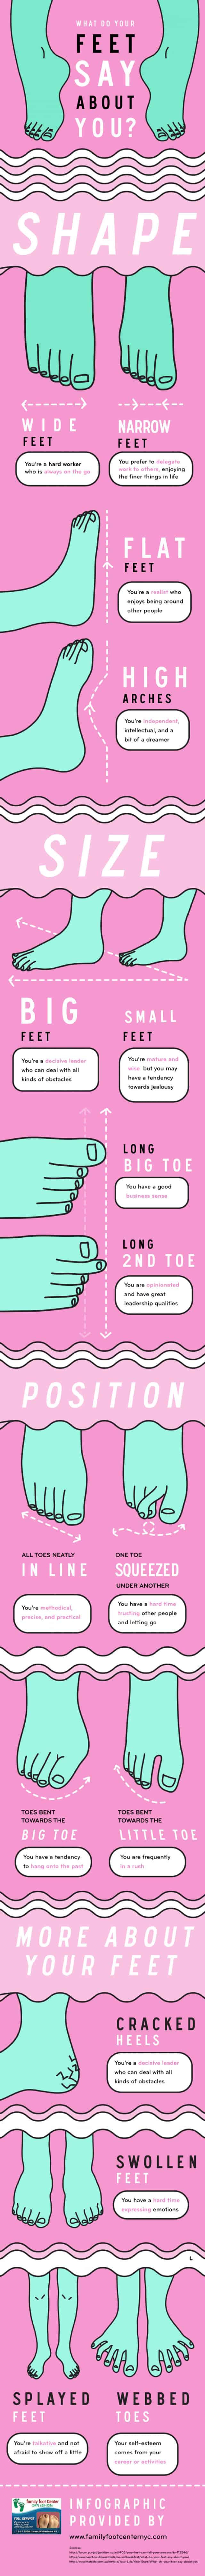 What Do Your Feet Say About You Infographic